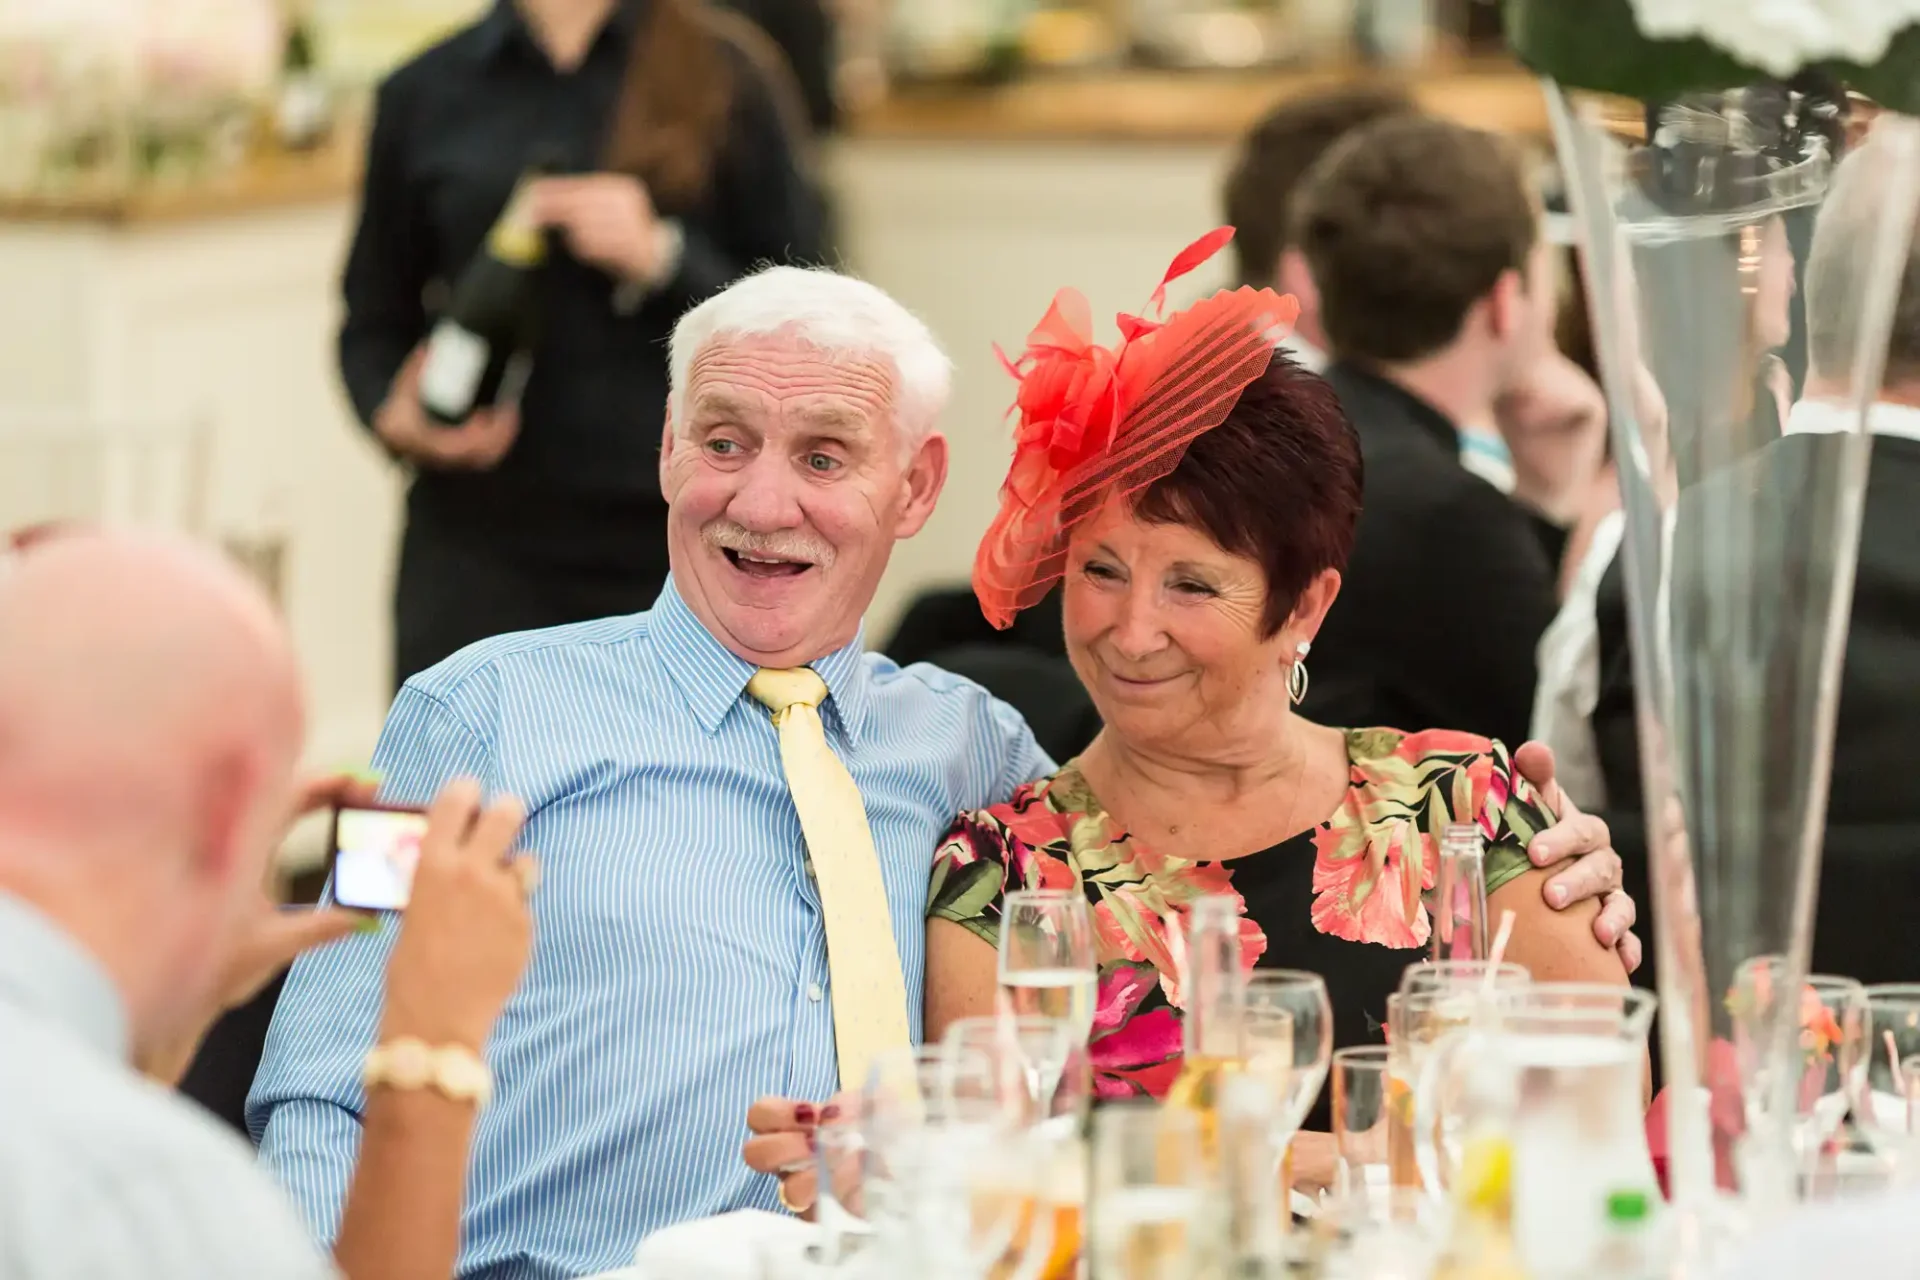 An elderly man in a blue shirt and yellow tie laughs joyously beside a woman in a floral dress and red hat at a formal event.